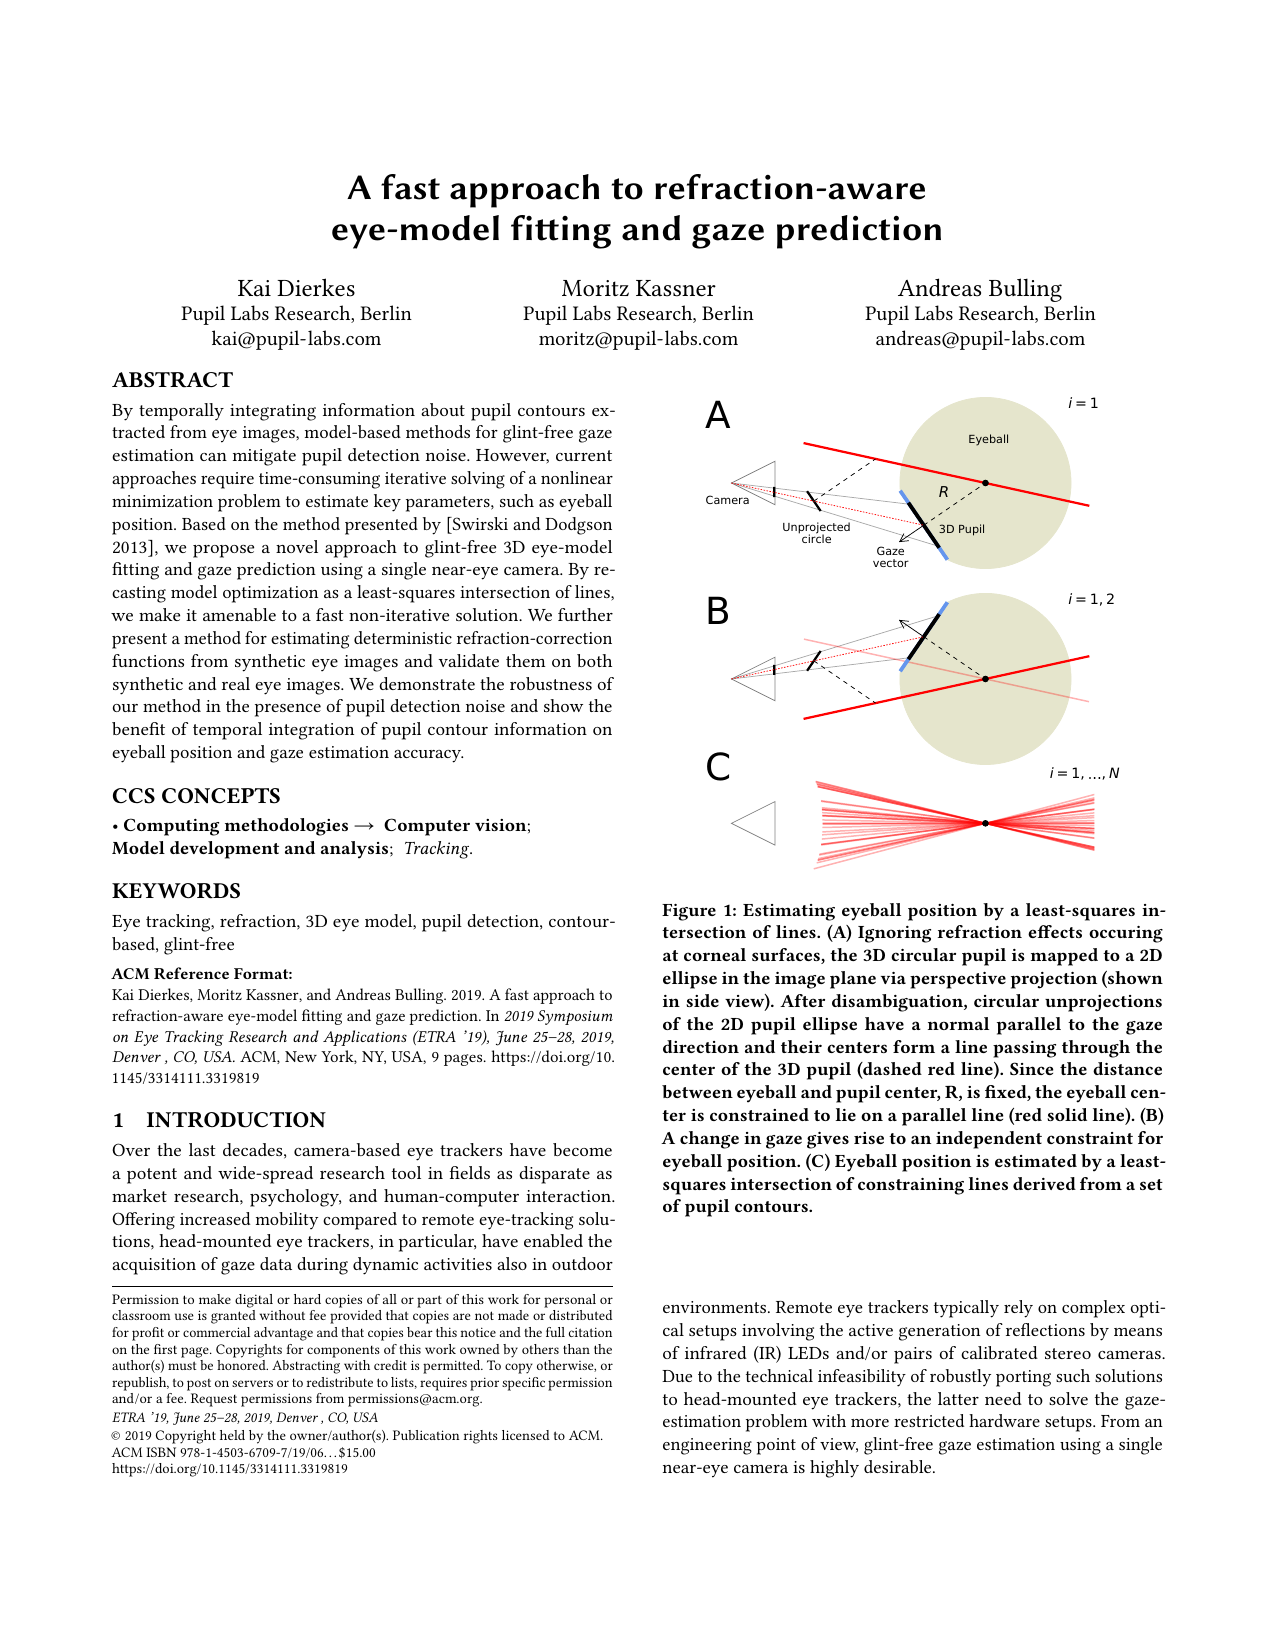 A fast approach to refraction-aware 3D eye-model fitting and gaze prediction